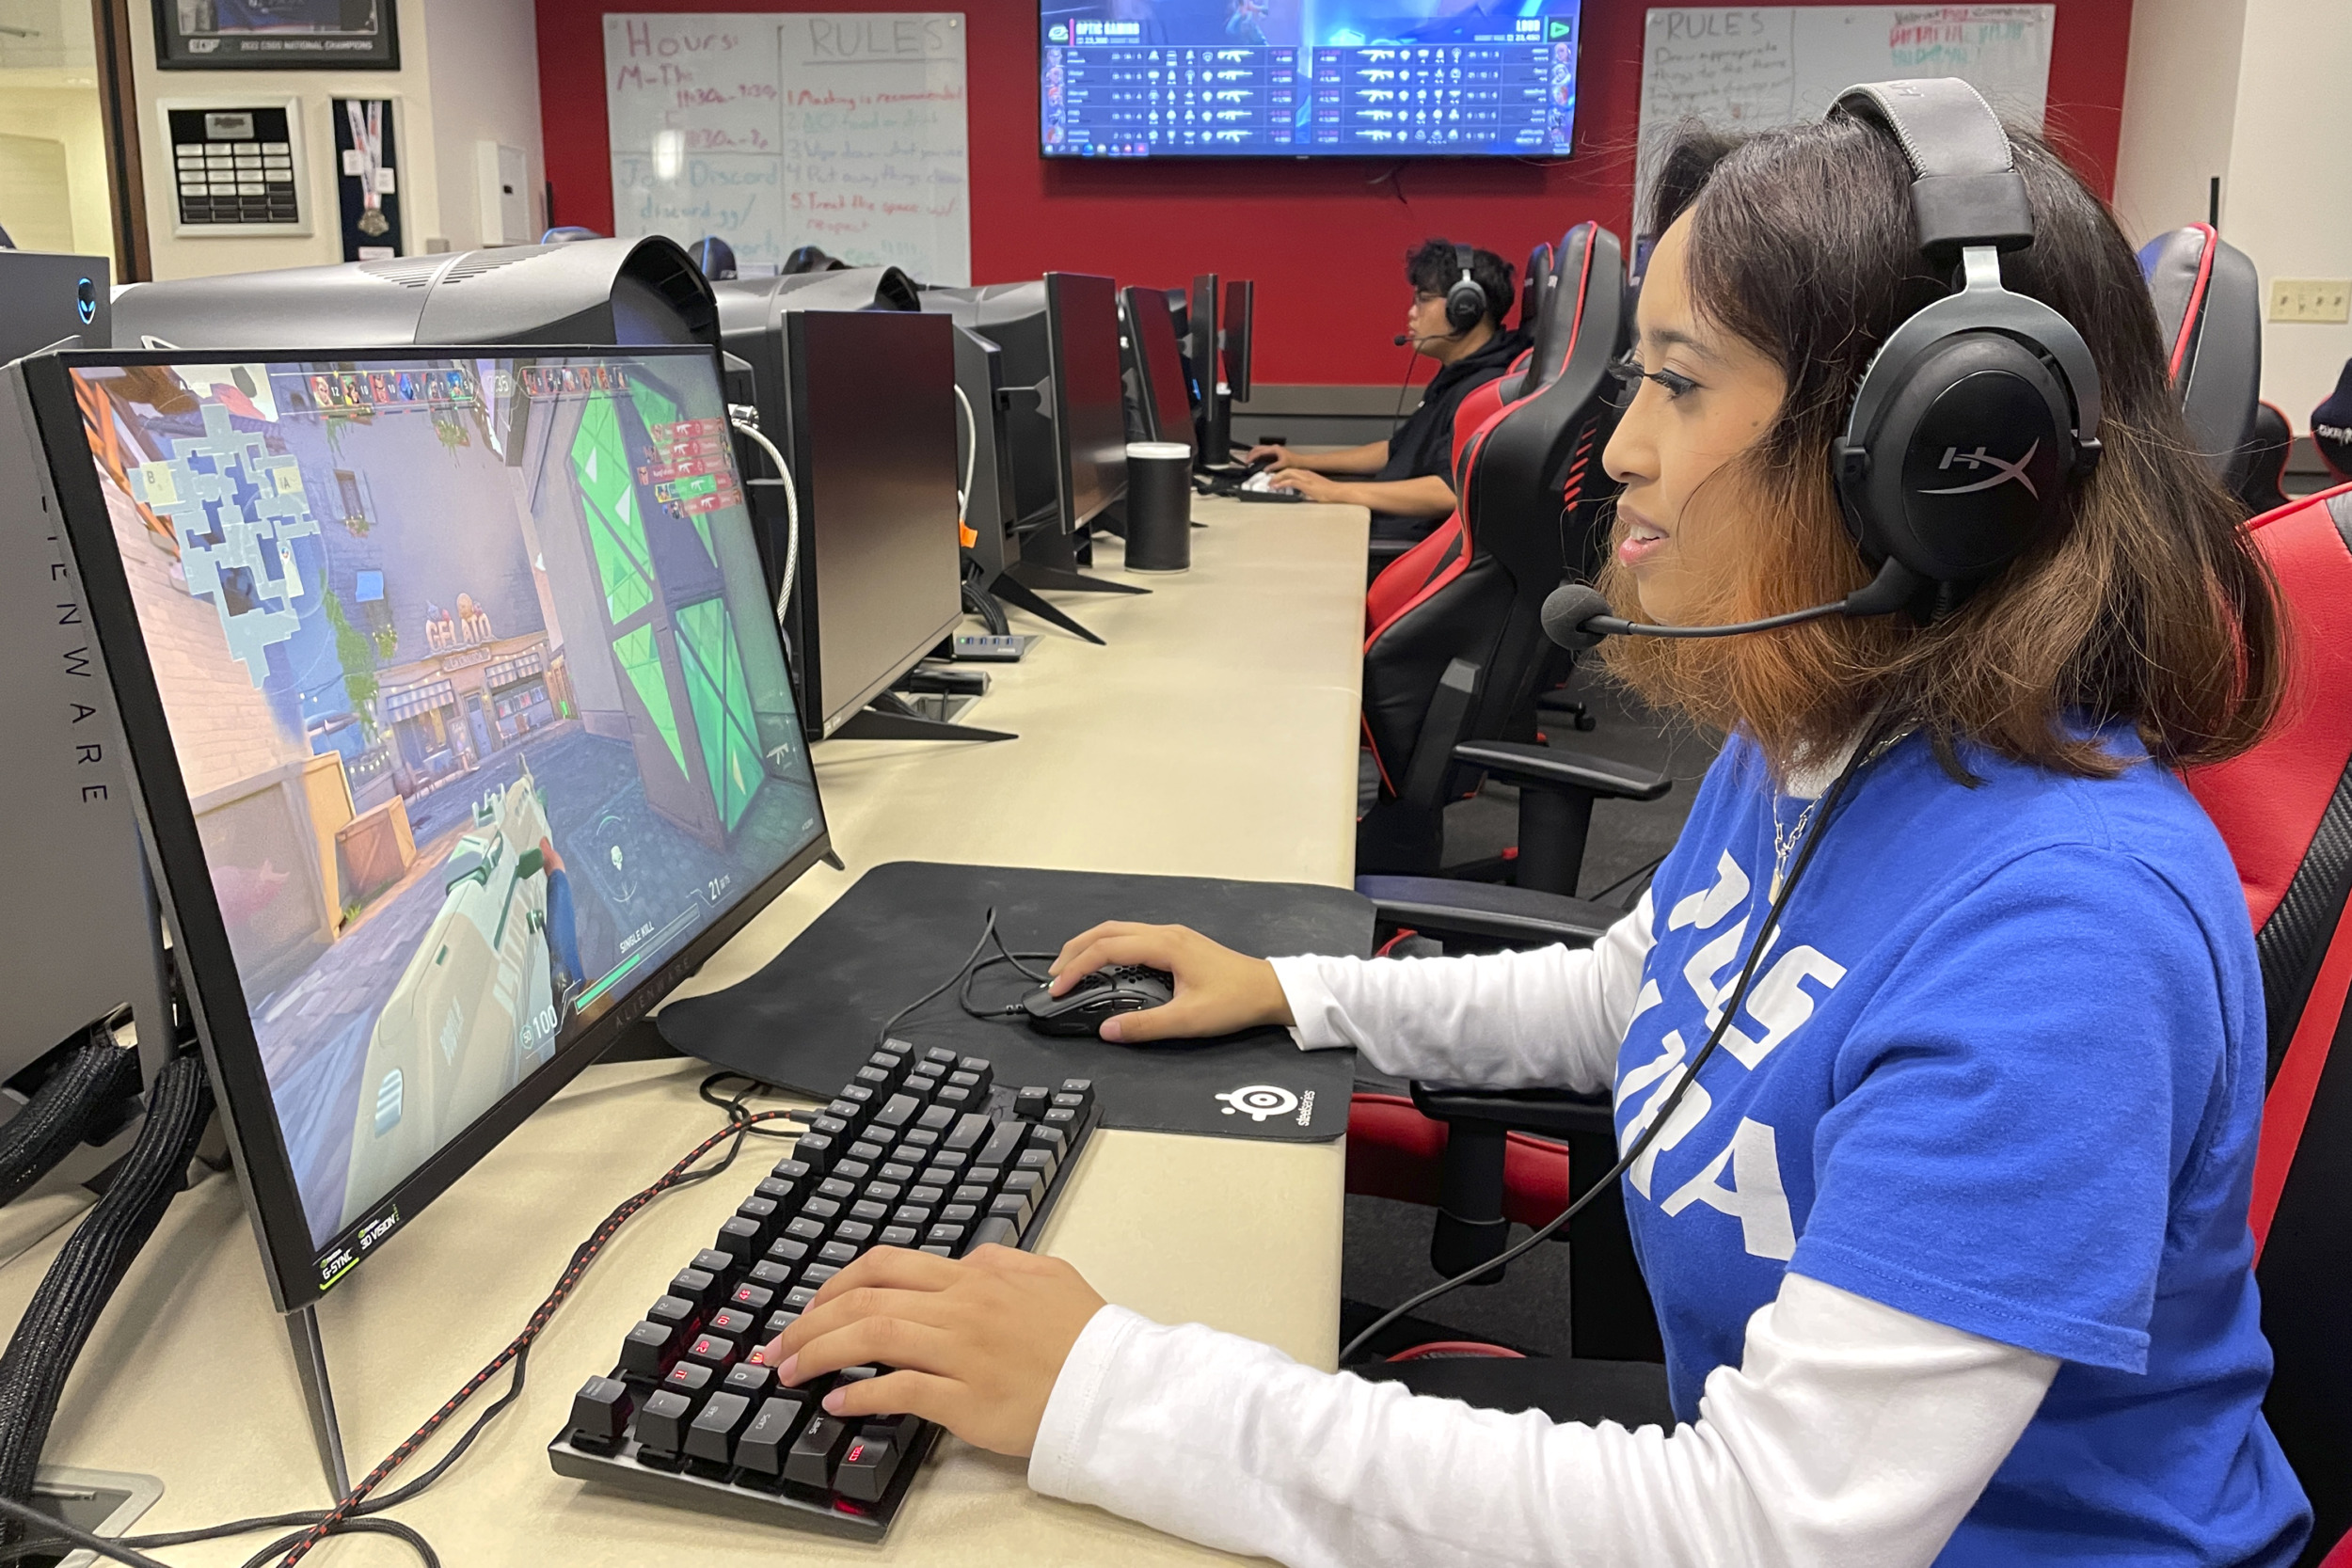 eSports: Young womans with dark hair wearing a headset and blue t-shirt sits at desk with large monitor and gaming keyboard playing game